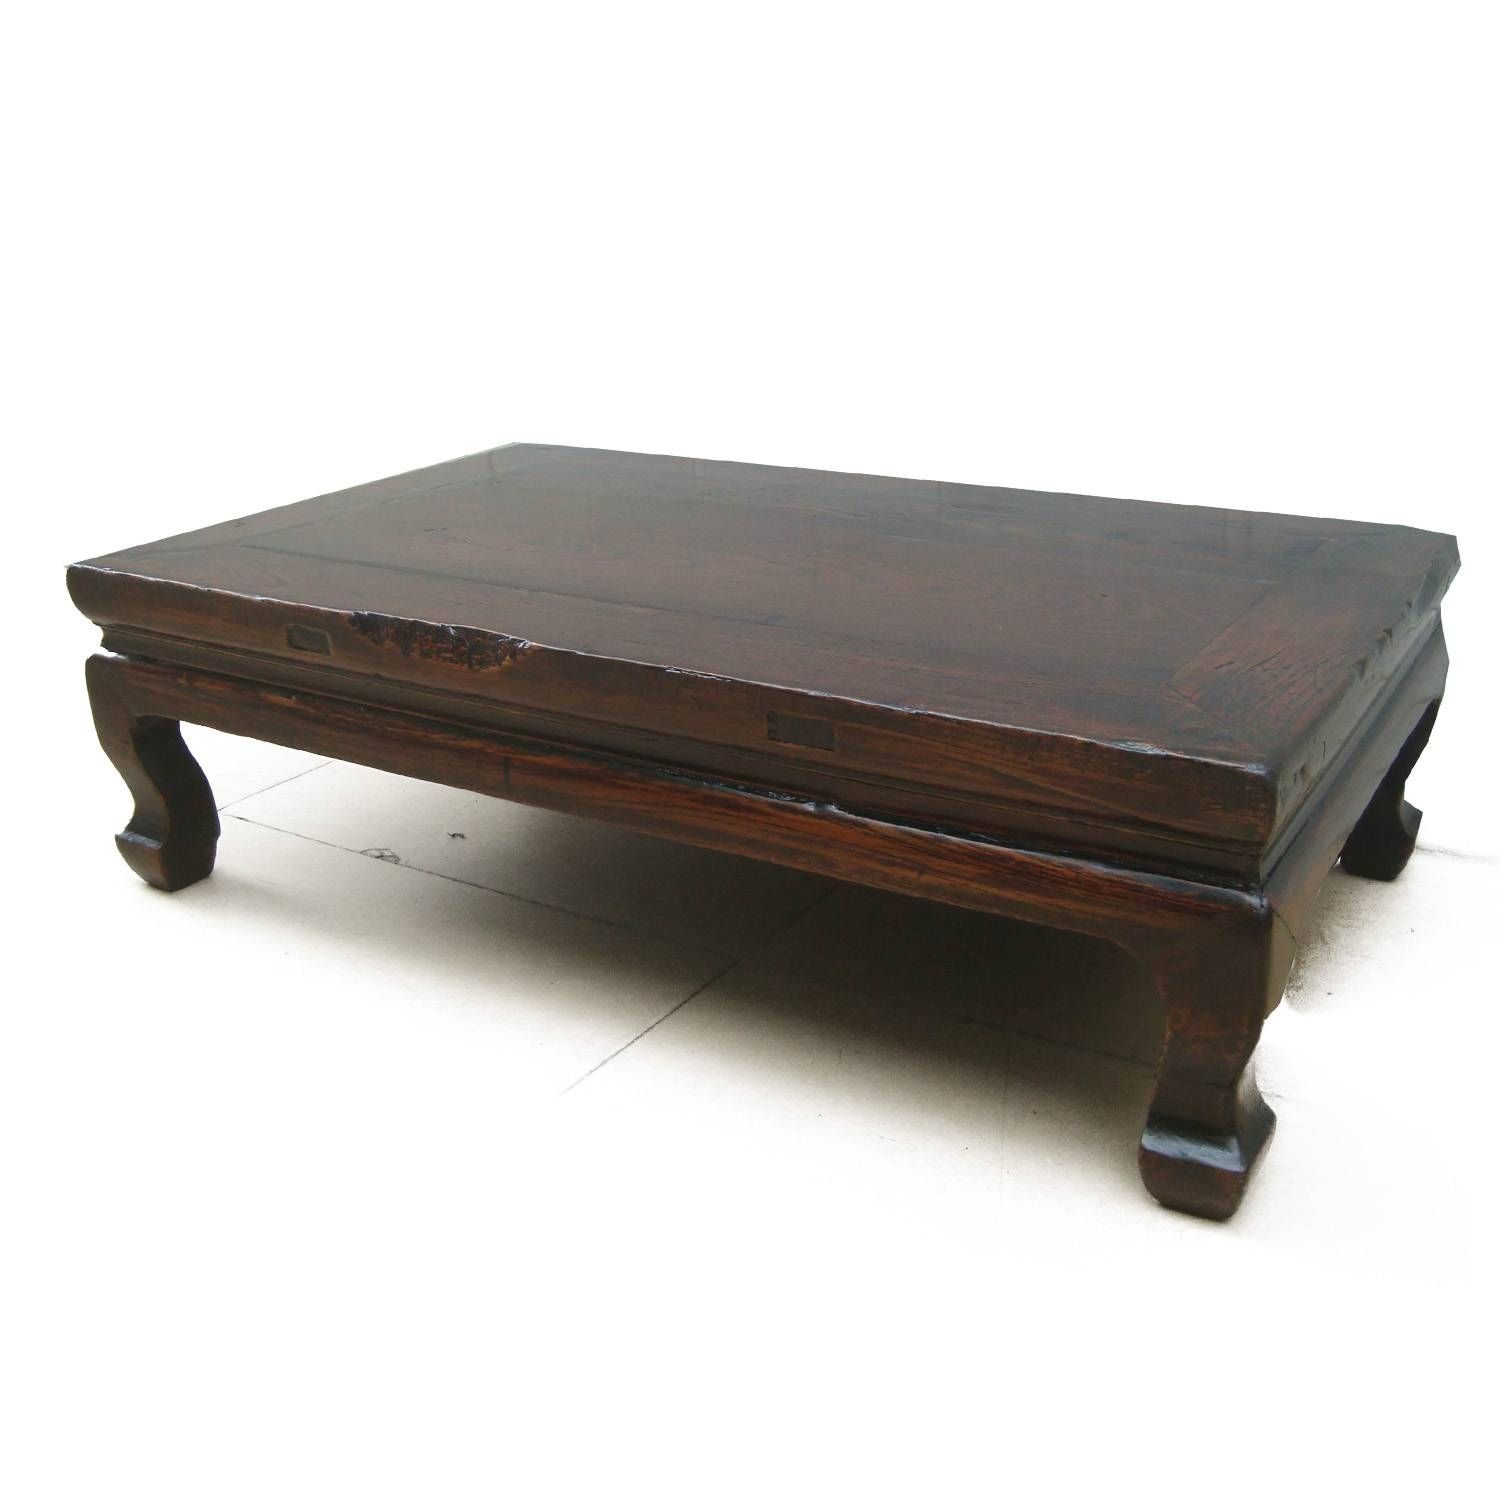 Brilliant Square Glass Top Coffee Table With Coffee Table Various With Regard To Chinese Coffee Tables (View 8 of 30)